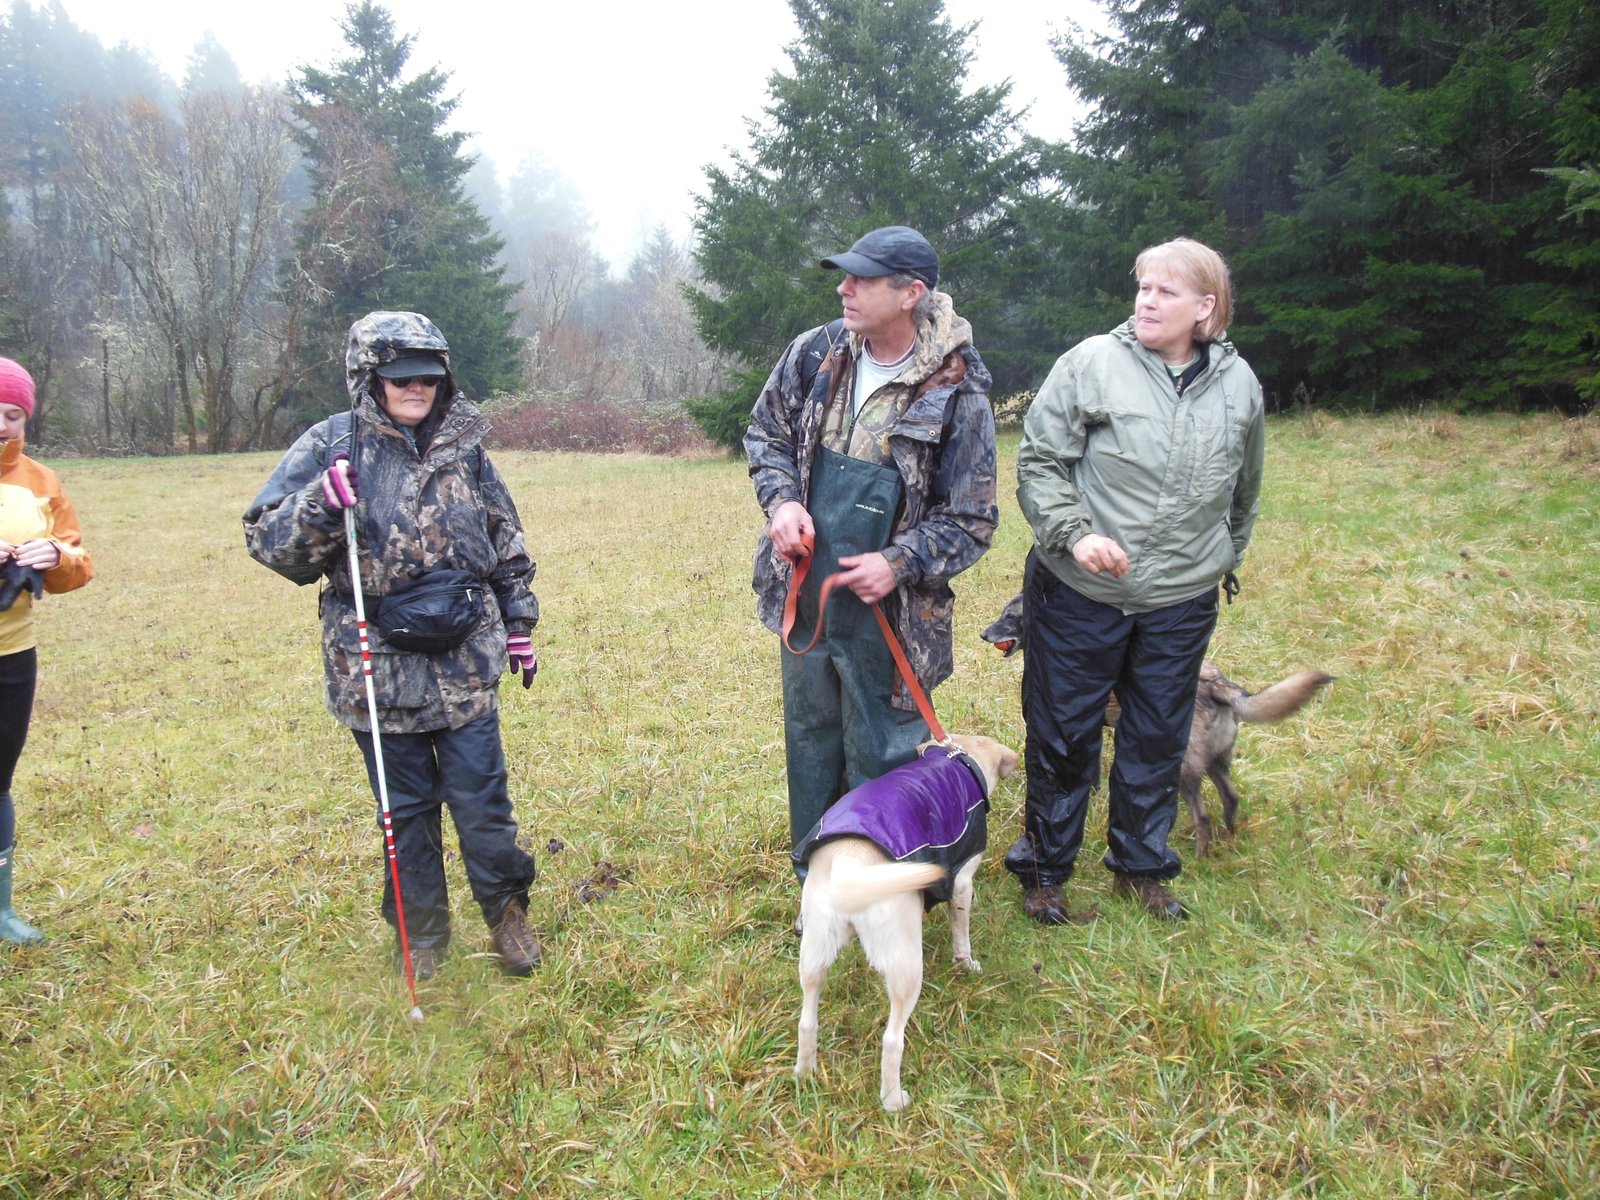 Oregon Truffle Festival: Dogs, Growers, Gourmands and Recipes